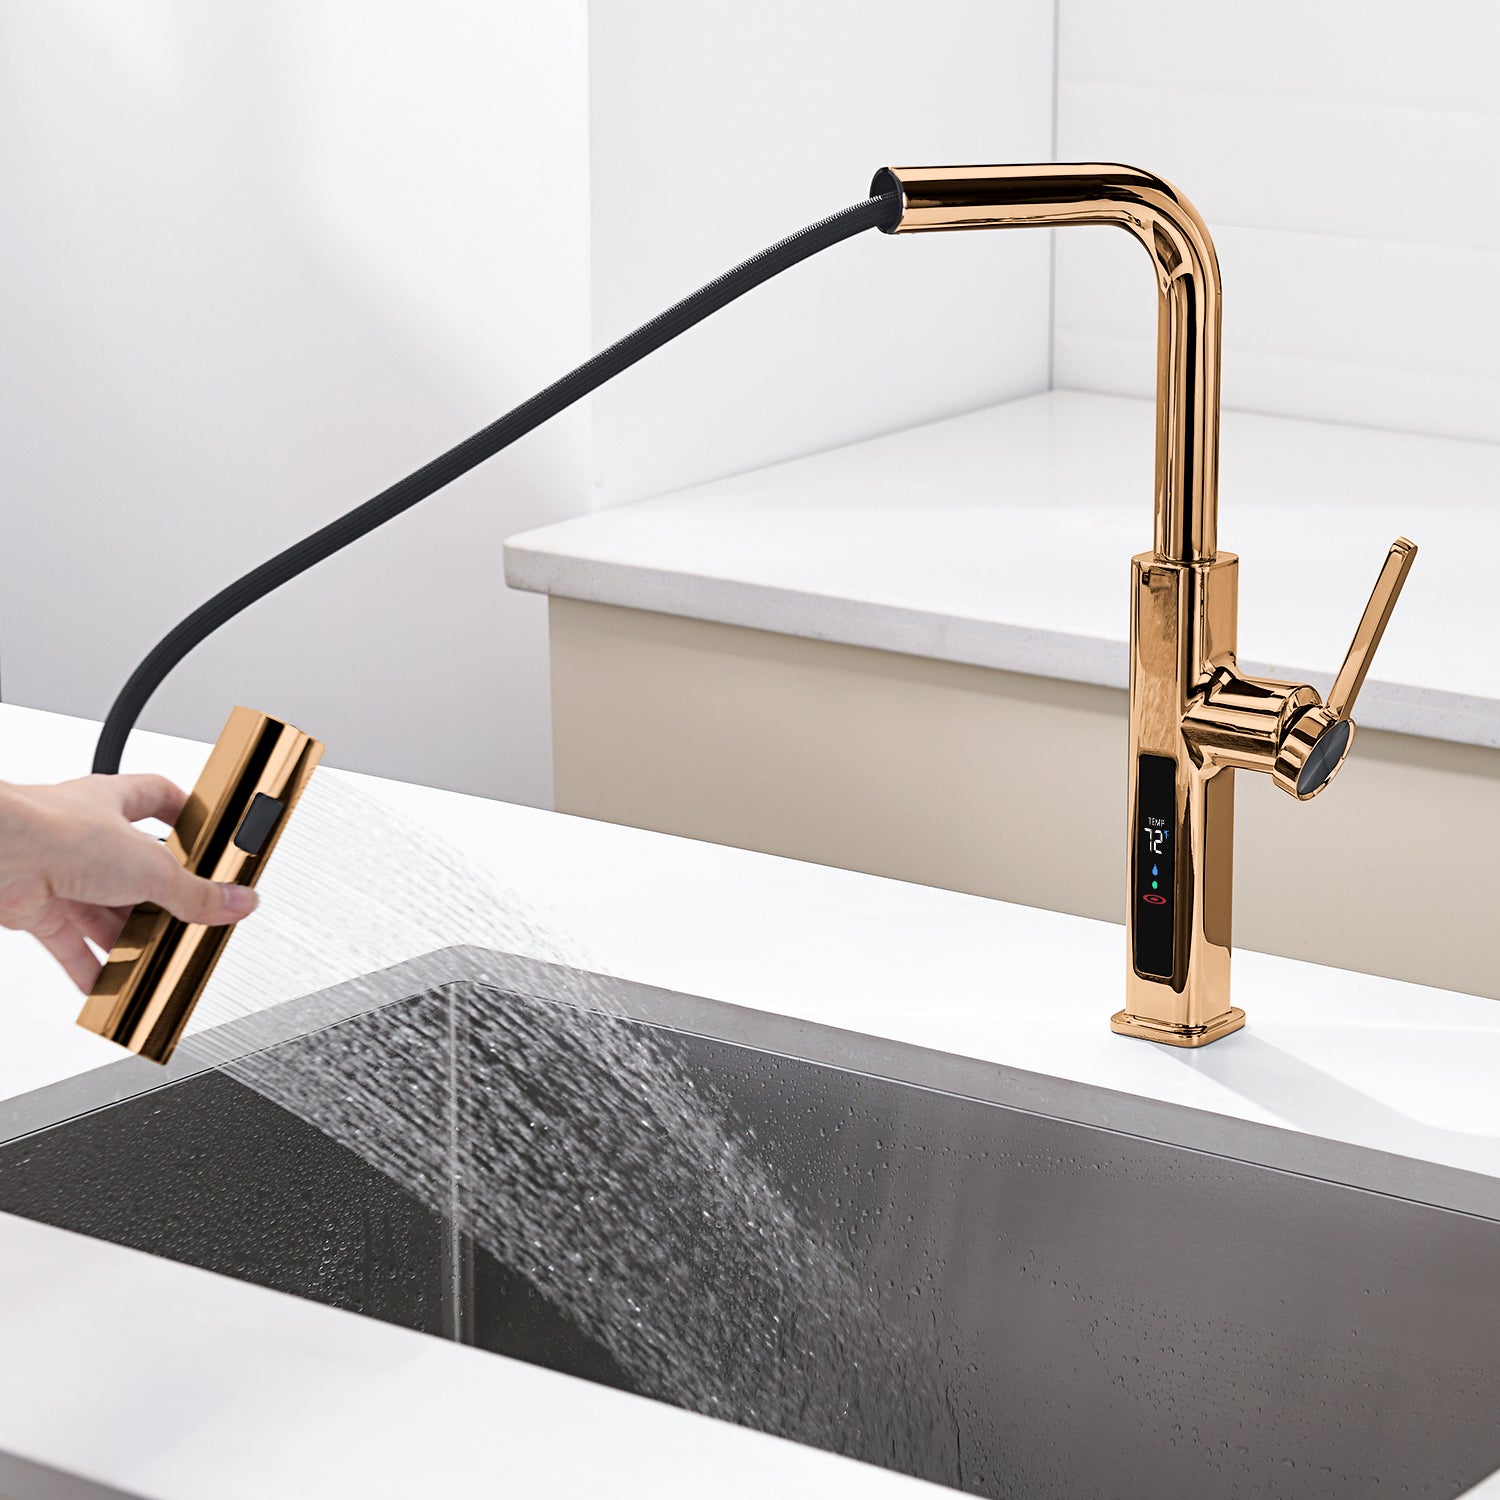 Lefton Waterfall & Pull - Out Kitchen Faucet with Temperature Display - KF2209 - Kitchen Faucets - Lefton Home